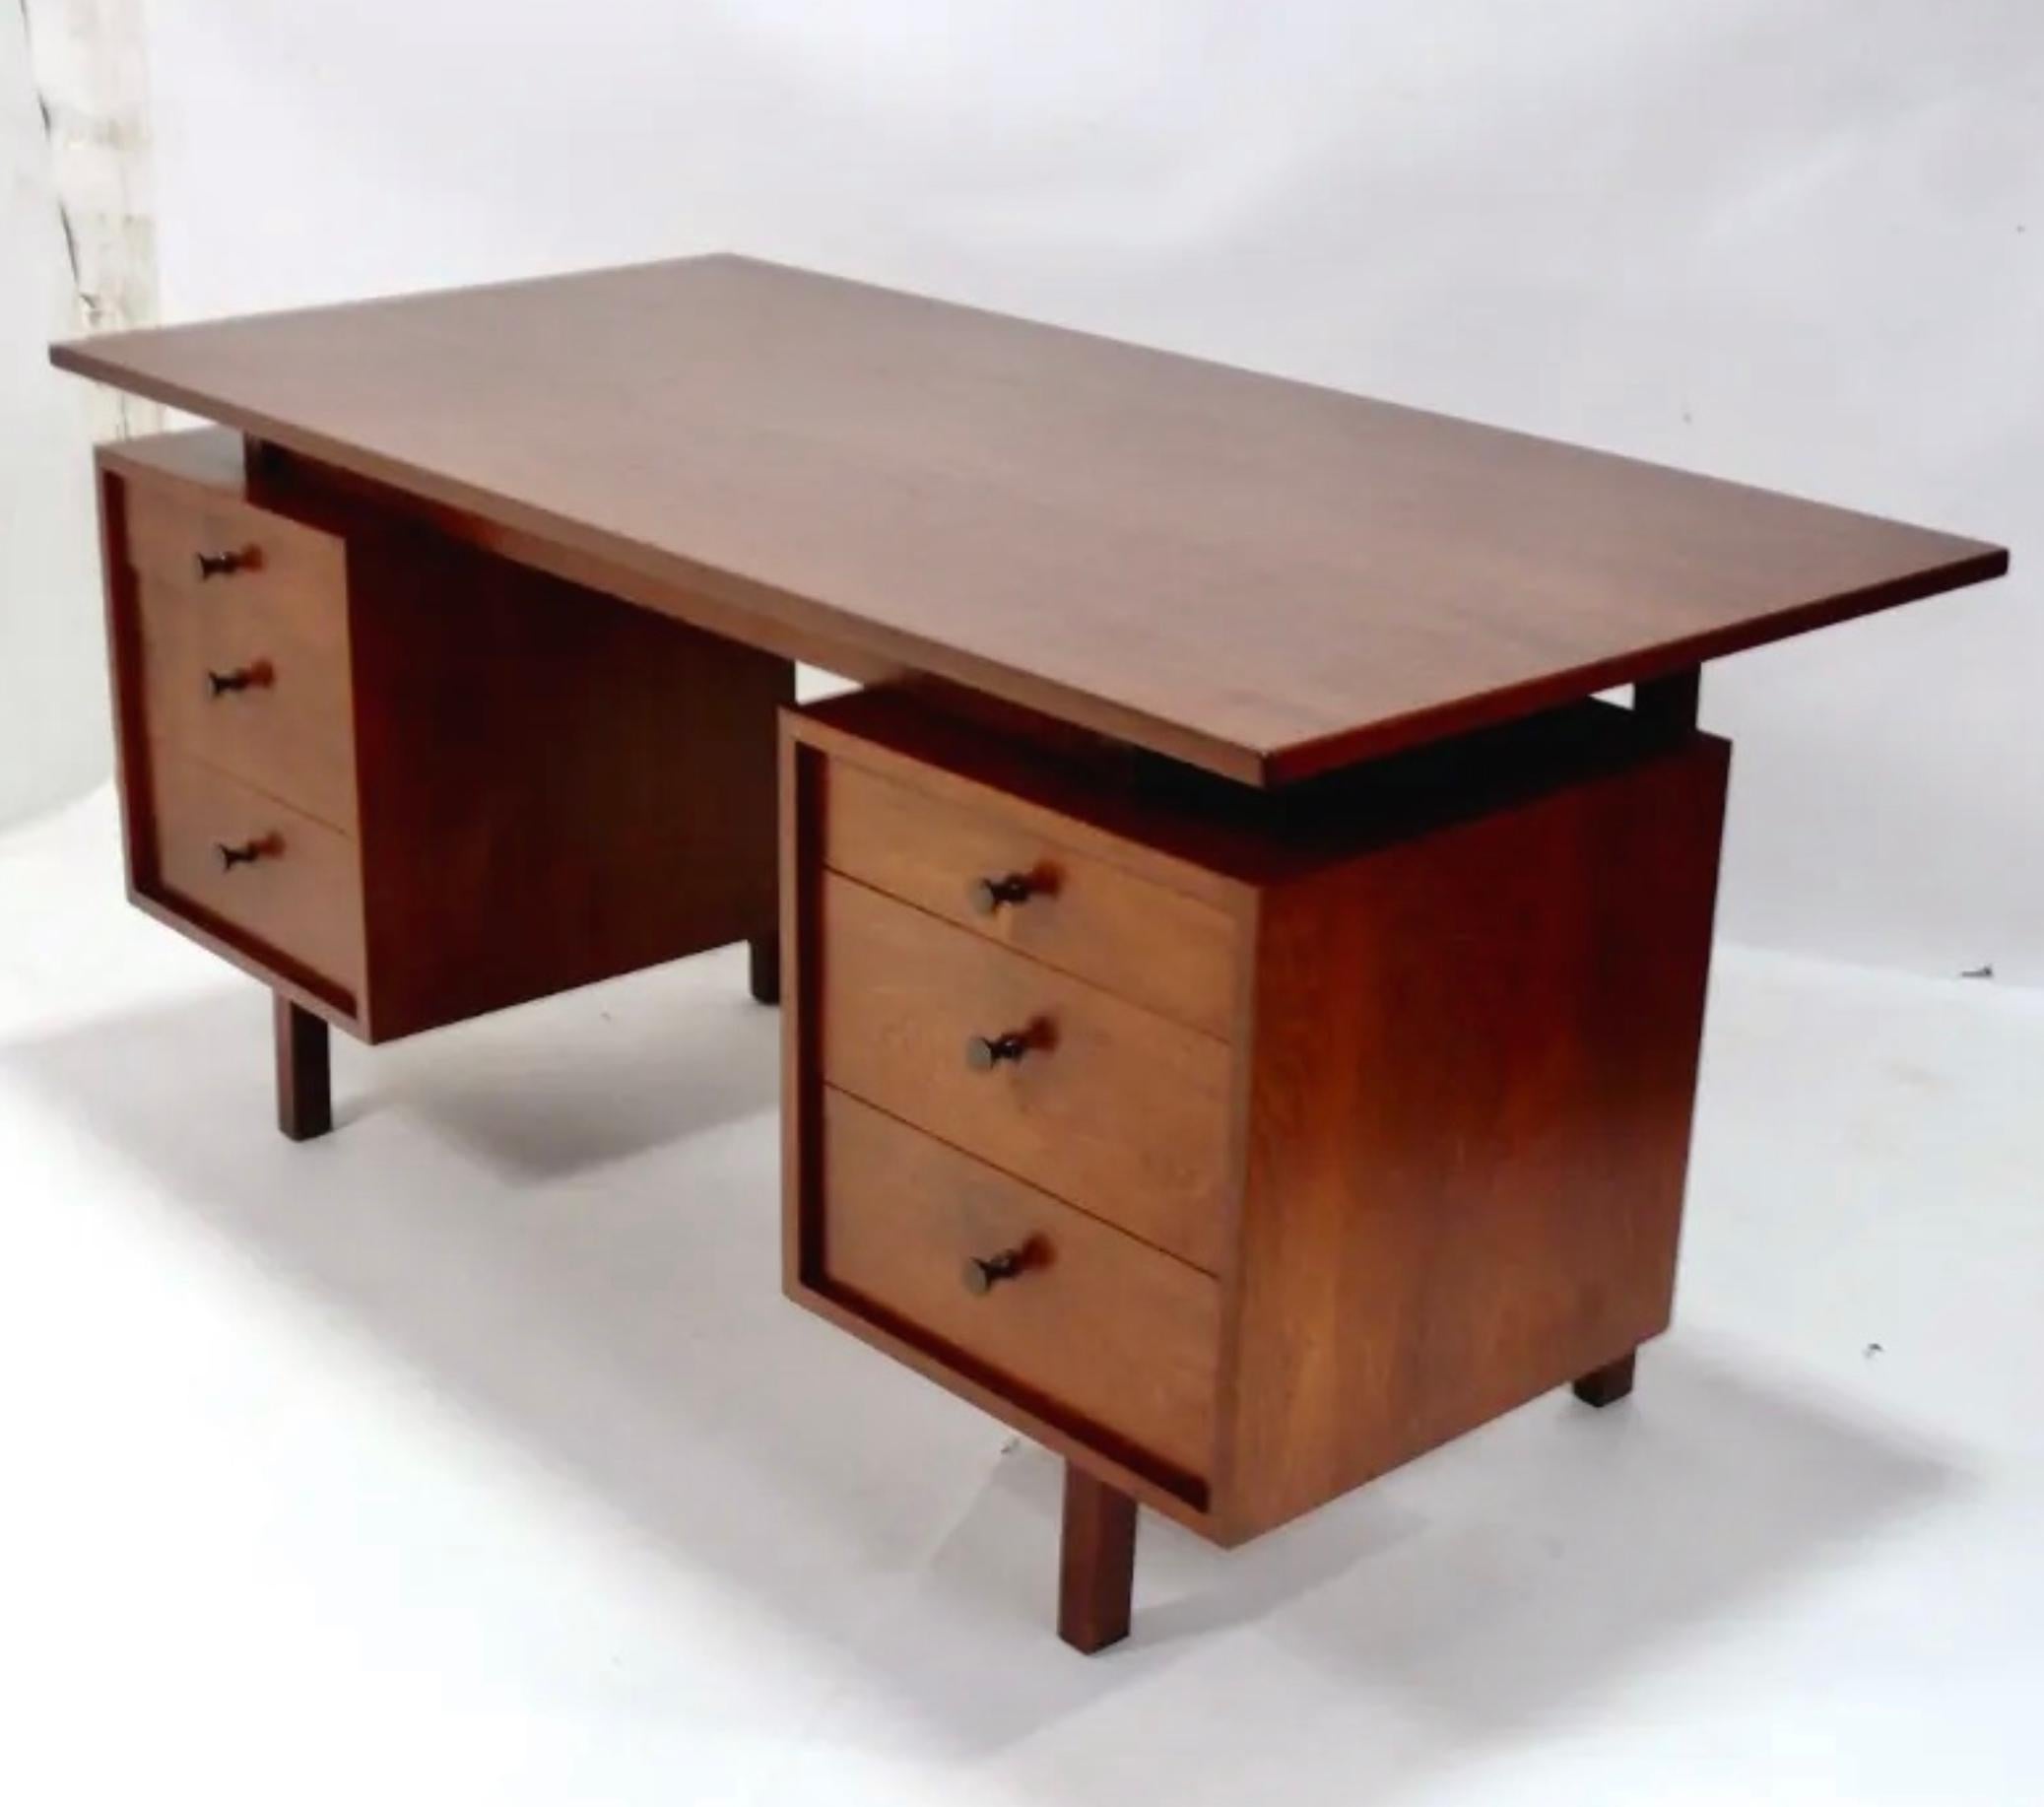 Clean Lined Mid Century desk, designed by Richard Artschwager, American, circa 1960s.nHand signed under drawer. It is finished on both sides, so it could be floated in a room. Desk measures 29